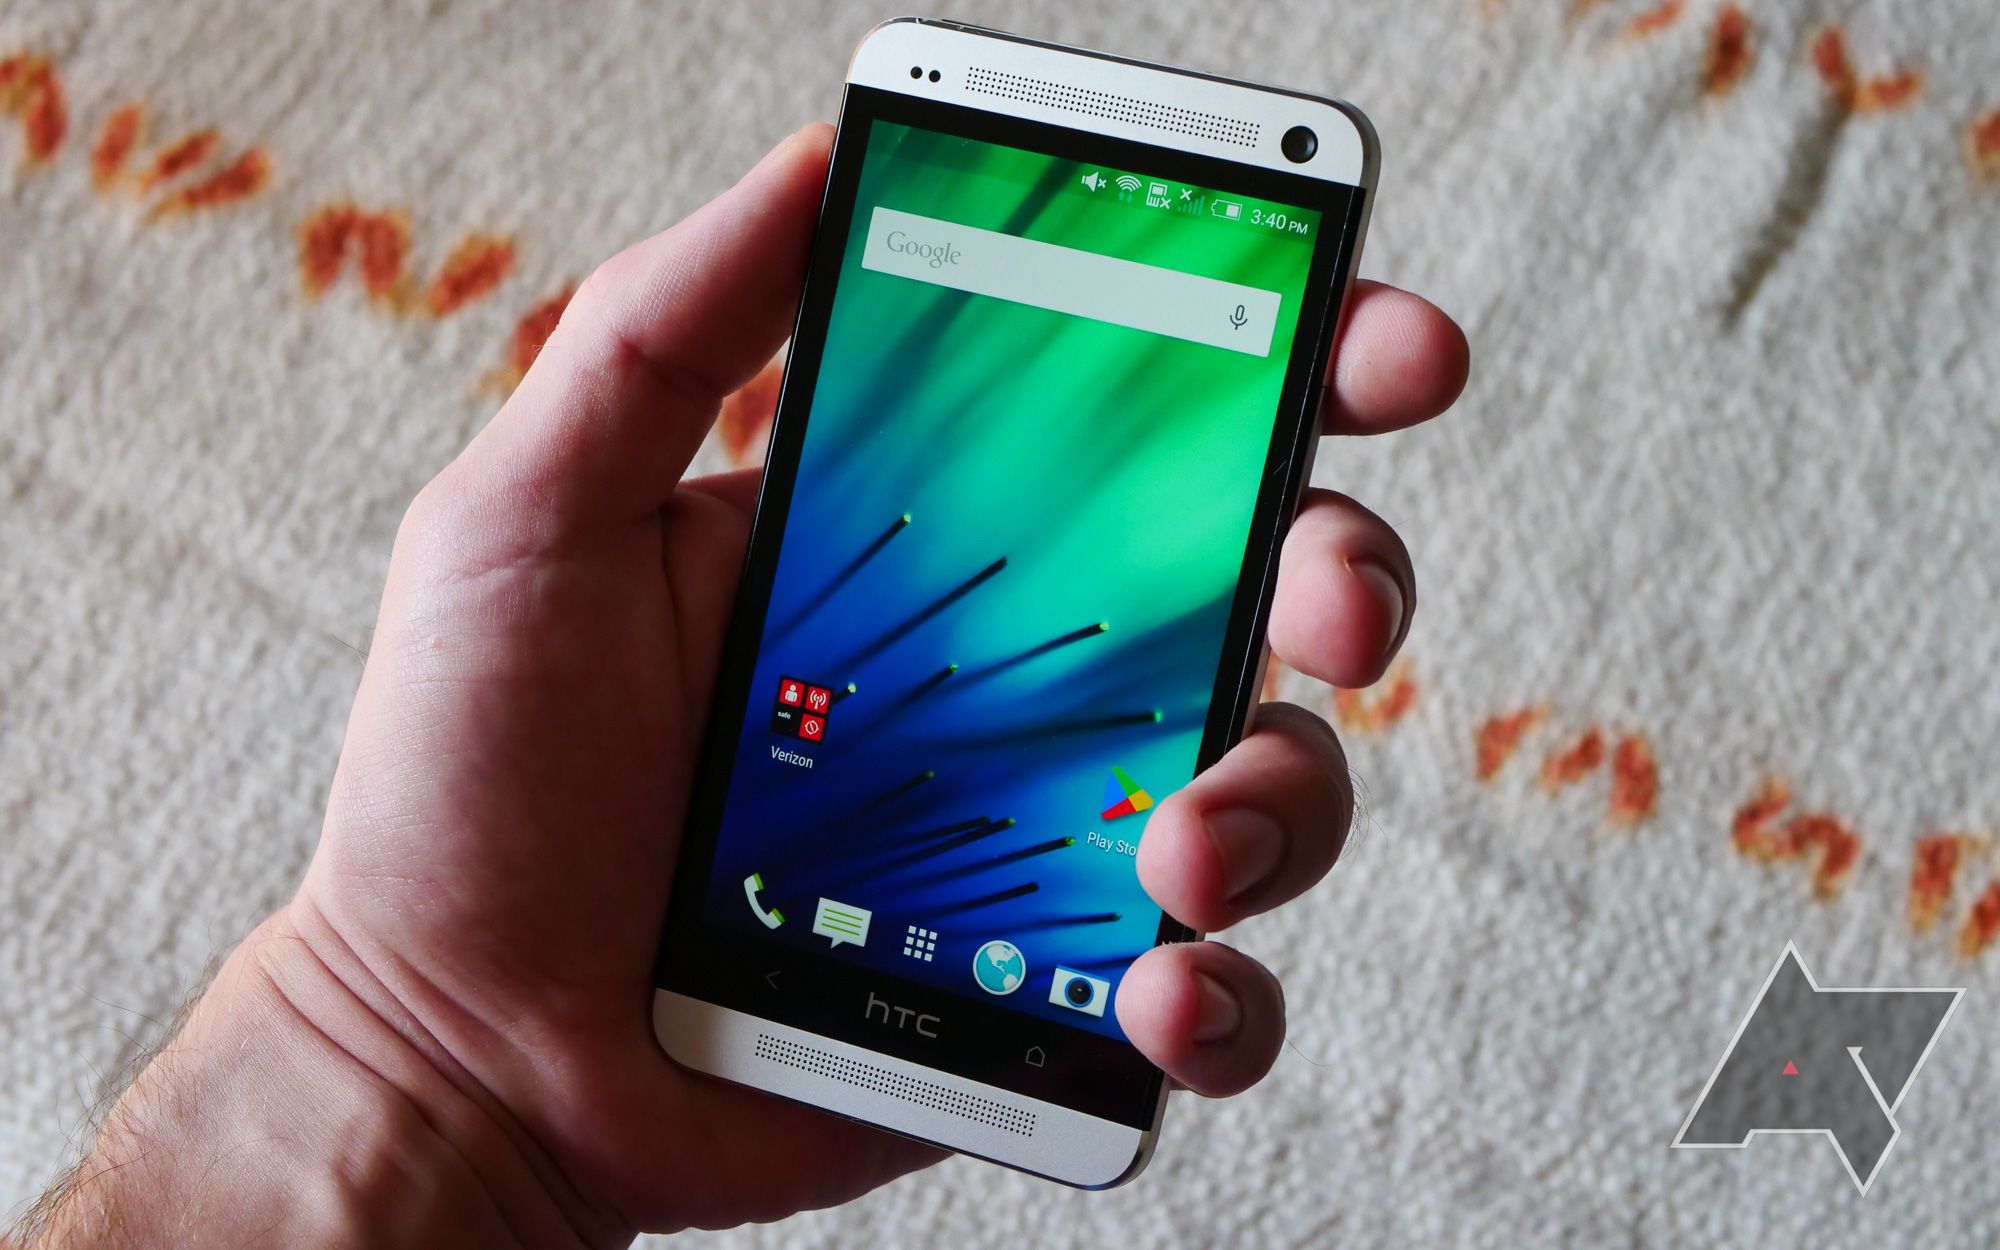 A man's hand holds an HTC M7 with a blue and green screen.